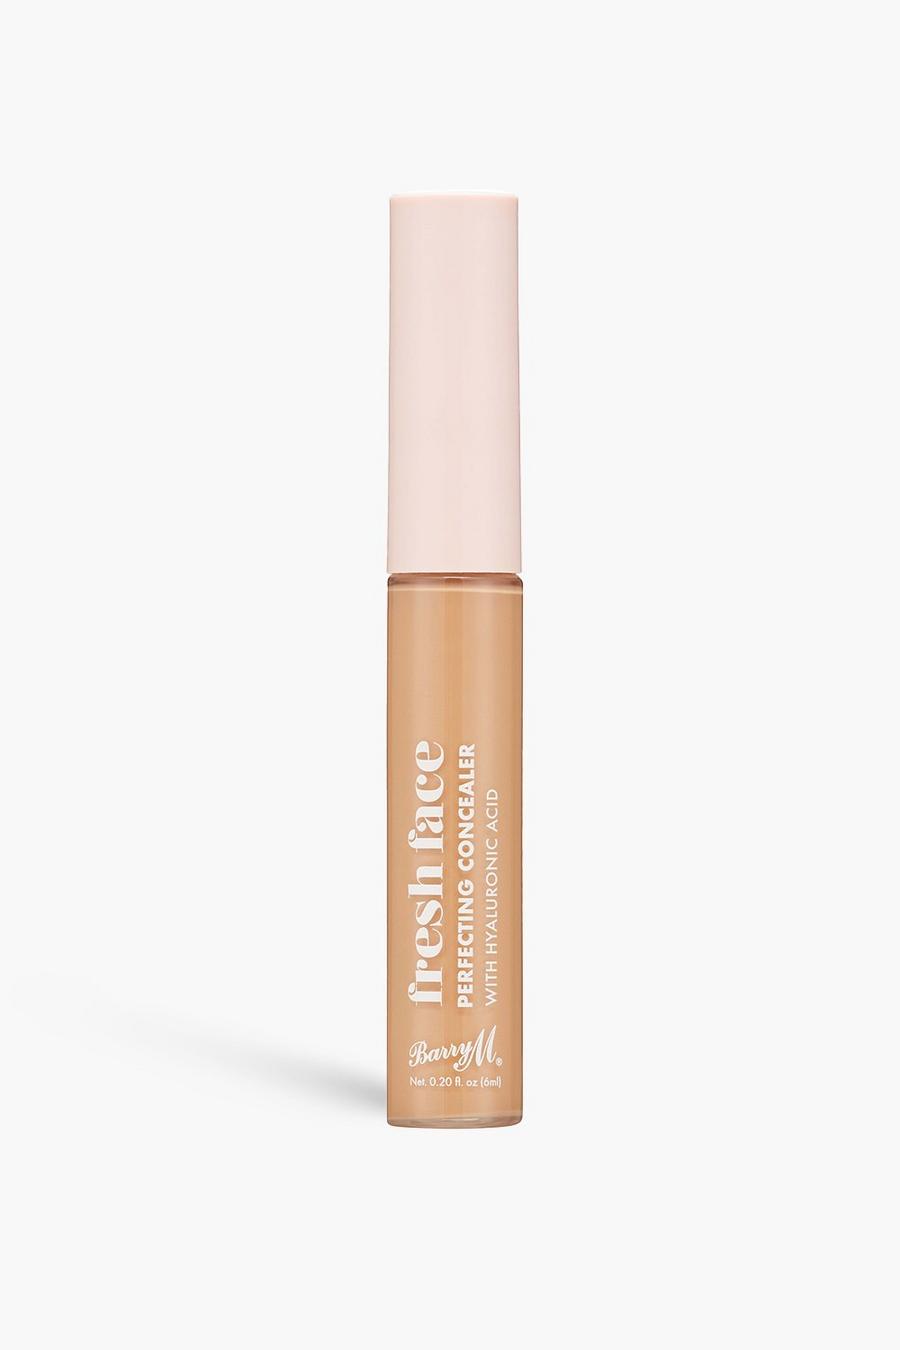 Tan marrone Fresh Face Perfecting Concealer – קונסילר 6 של Barry M